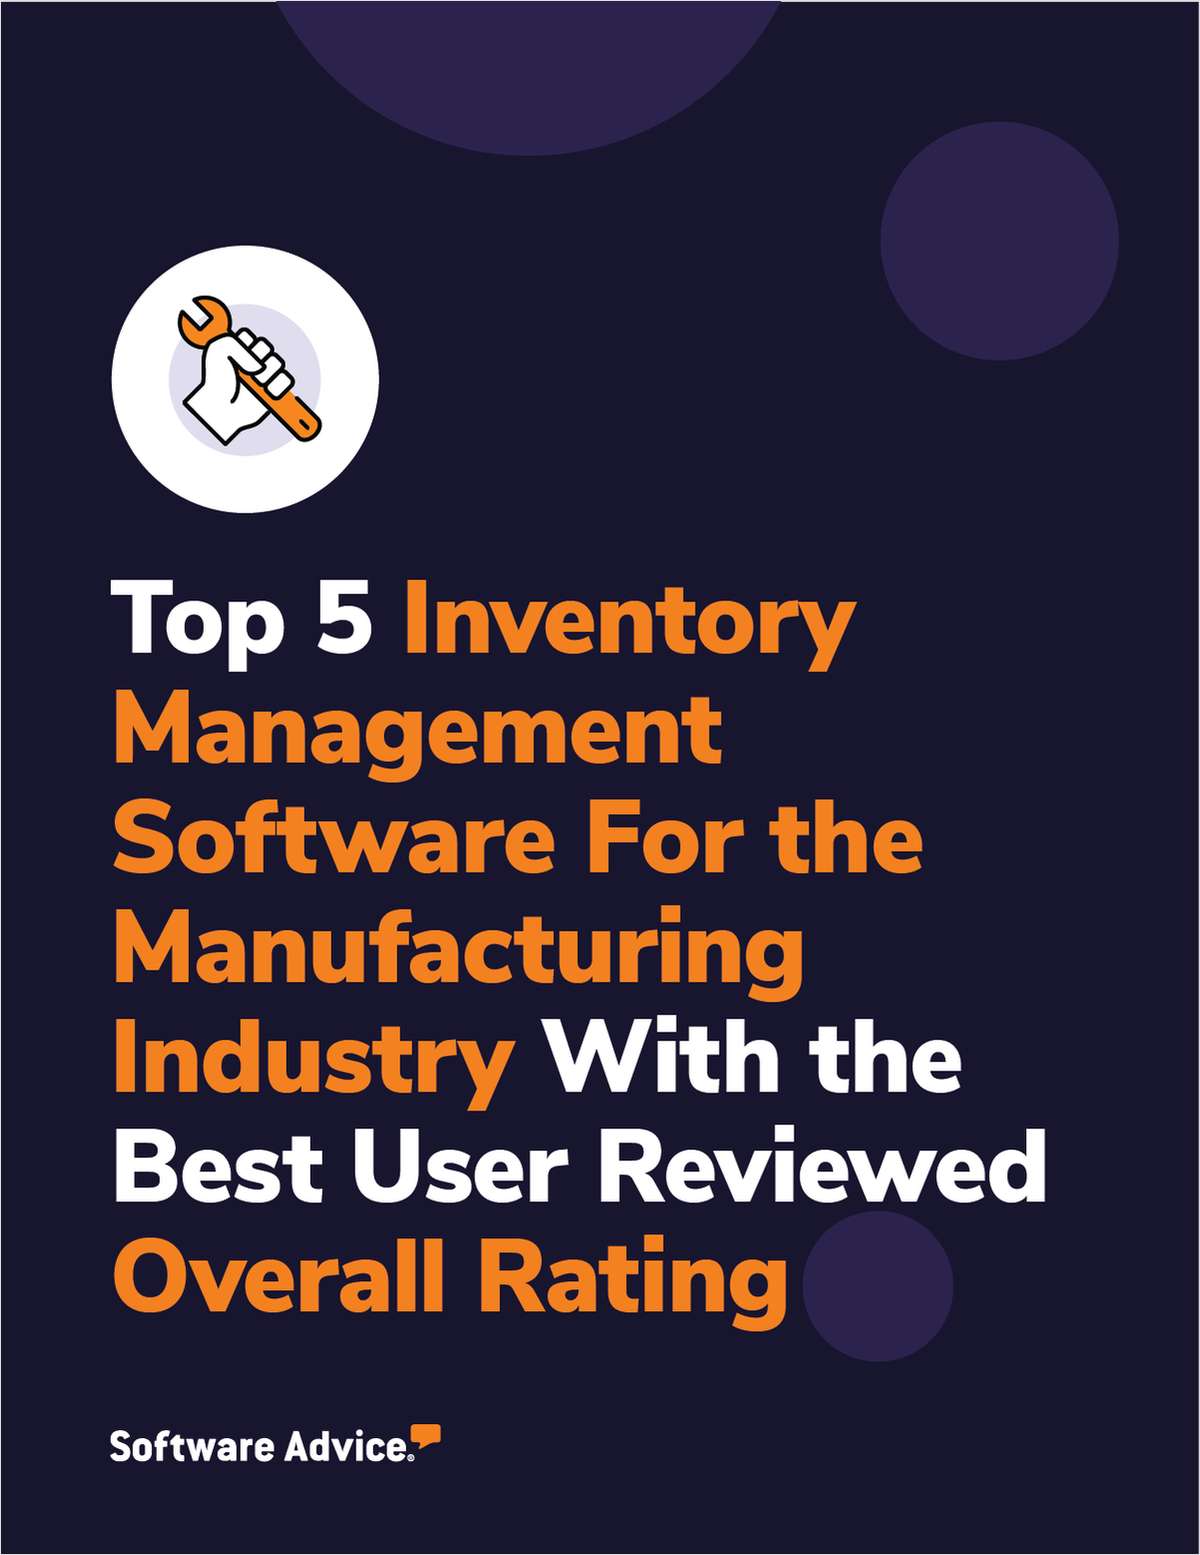 w sofg3907c8 - Top 5 Inventory Management Software For the Manufacturing Industry With the Best User-Reviewed Overall Rating